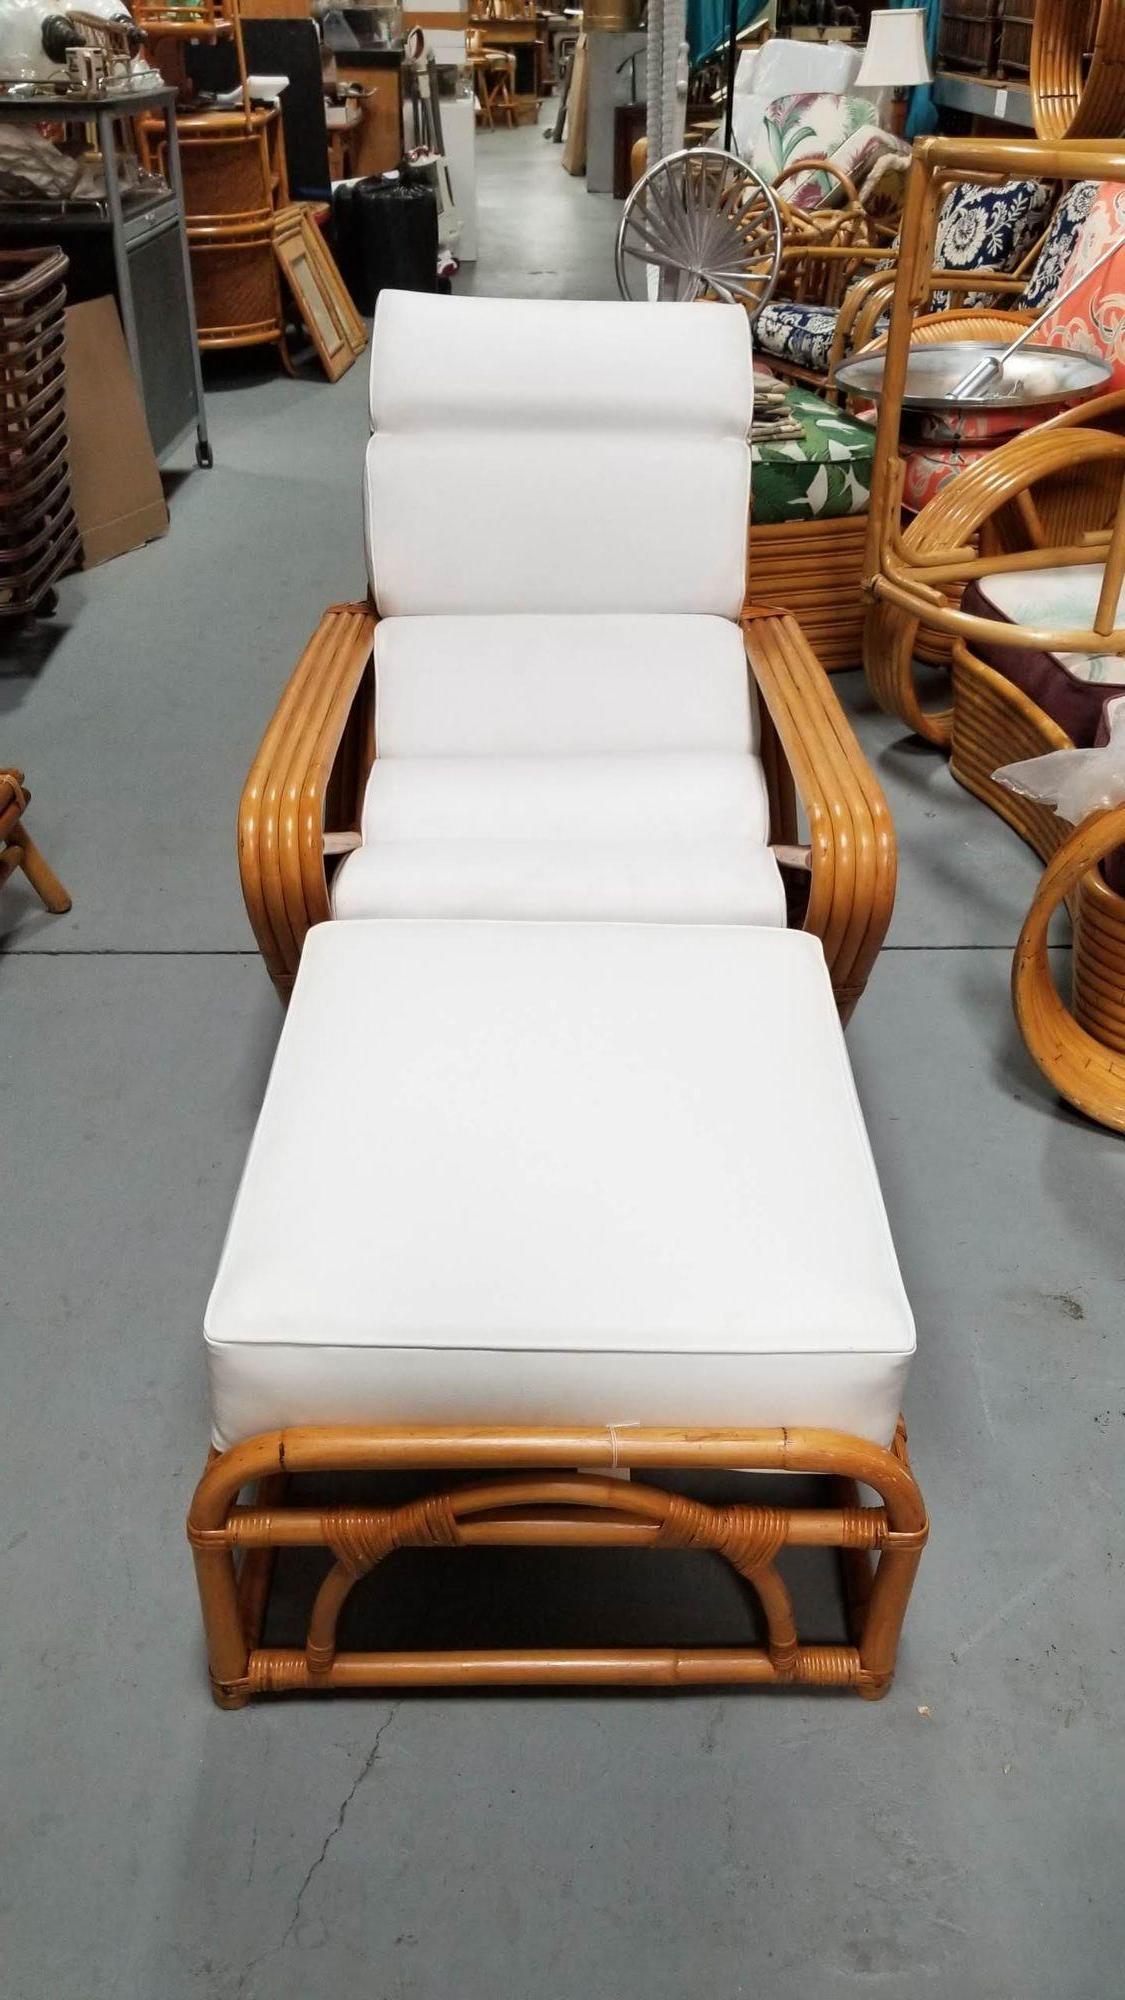 Experience ultimate comfort and style with our meticulously restored Rattan Four Strand Square Pretzel Chaise Lounge Chair, complete with a matching ottoman. This iconic design exudes timeless elegance and offers the perfect spot for relaxation and